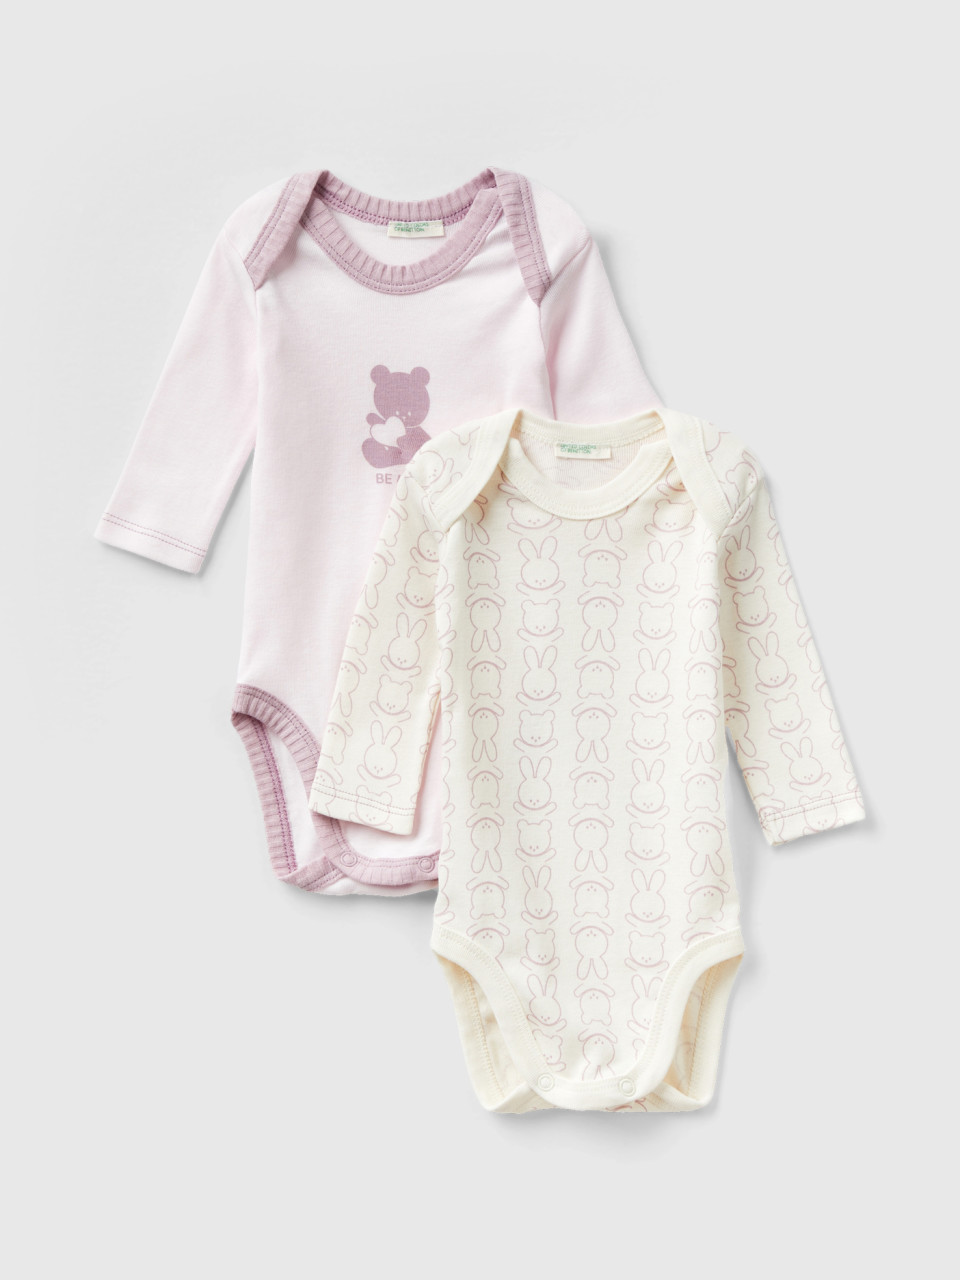 Benetton, Two Long Sleeve Bodysuits In Organic Cotton, Soft Pink, Kids